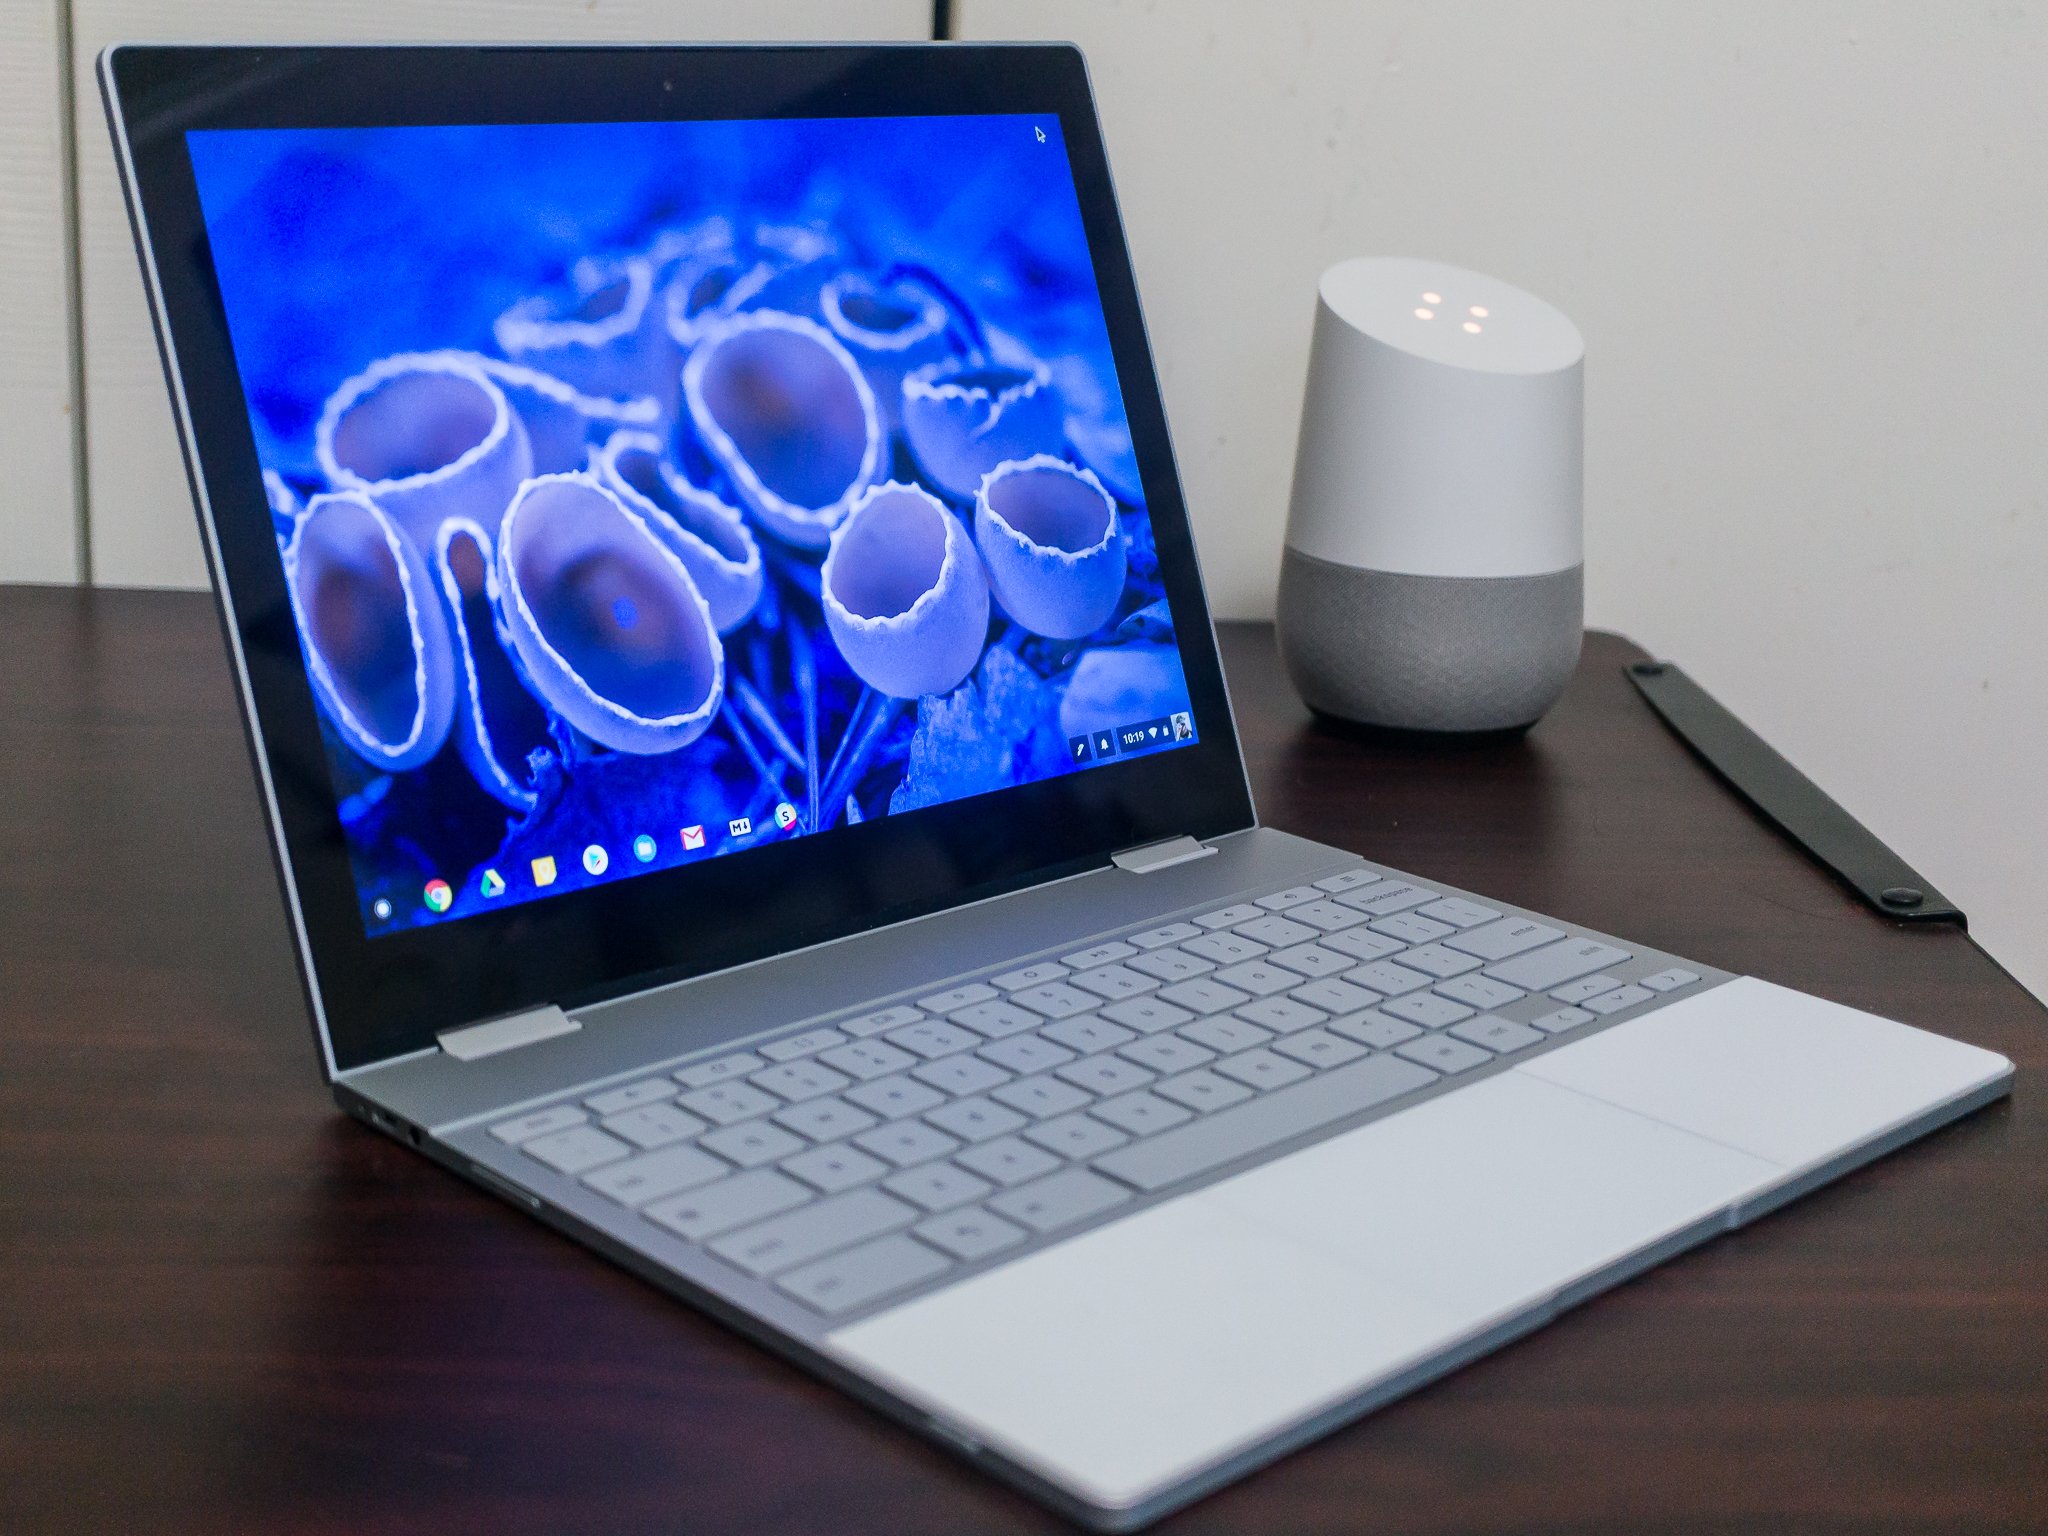 Google appears to be working on Windows 10 certification for its Pixelbook